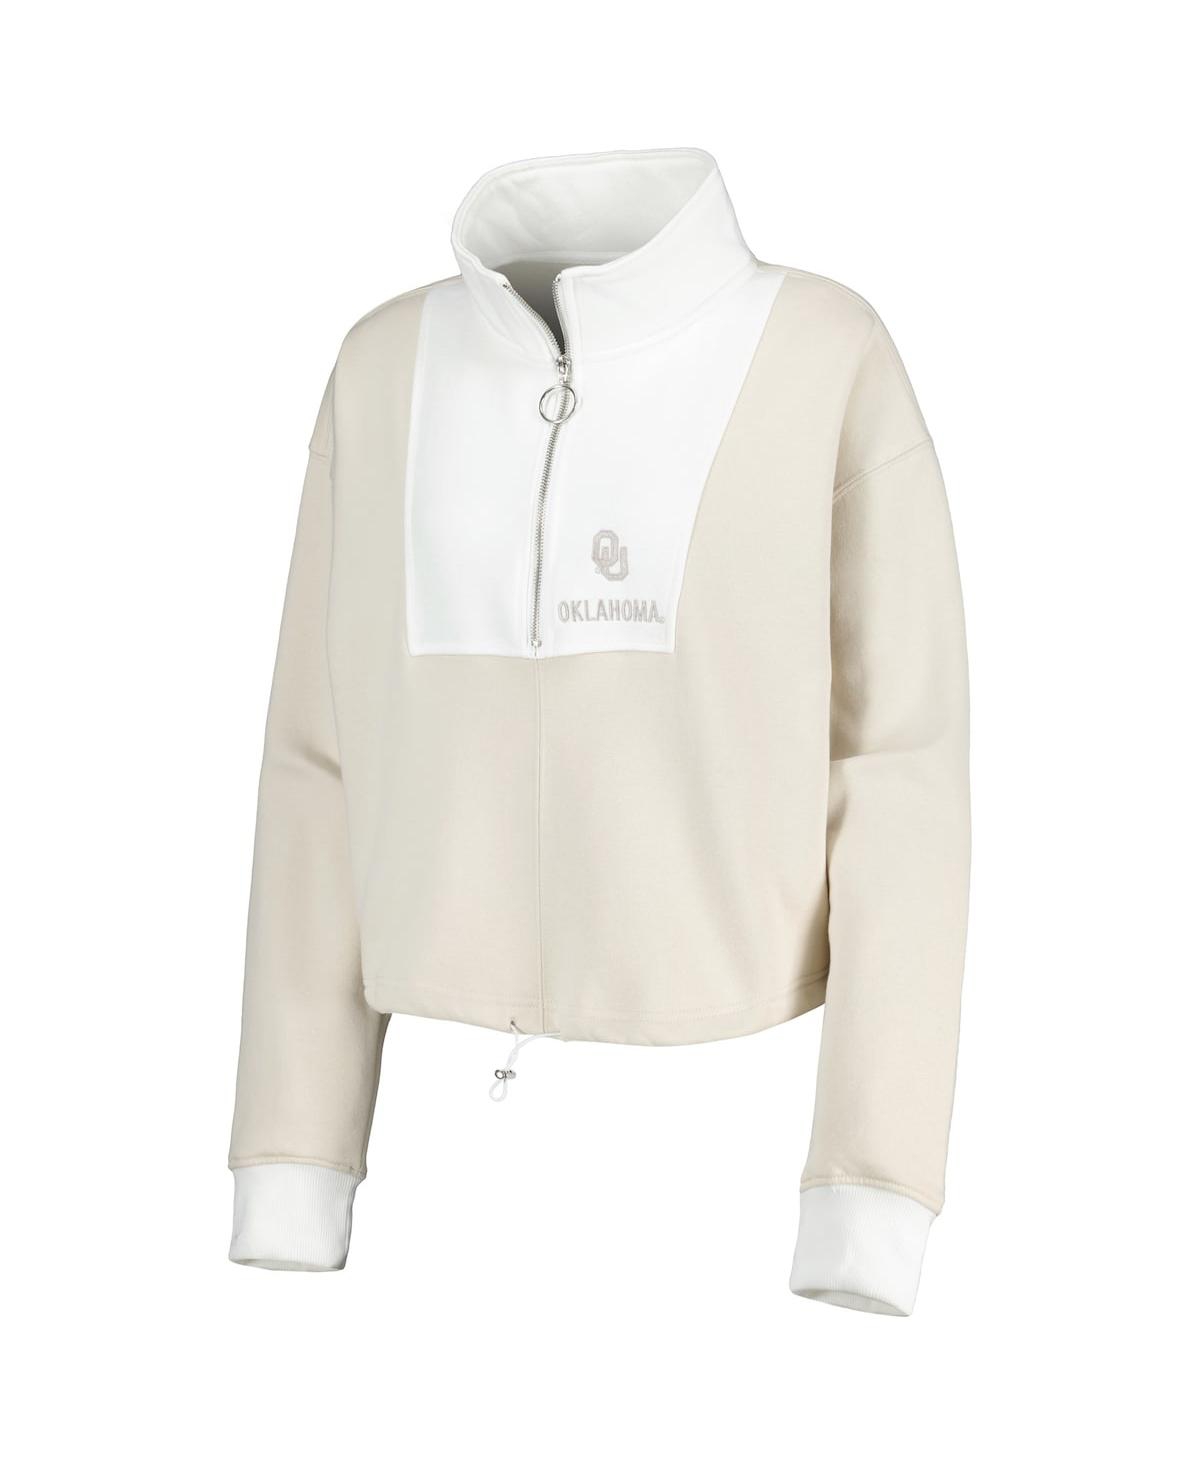 Shop Gameday Couture Women's  Tan, White Oklahoma Sooners Color-block Quarter-zip Jacket In Tan,white